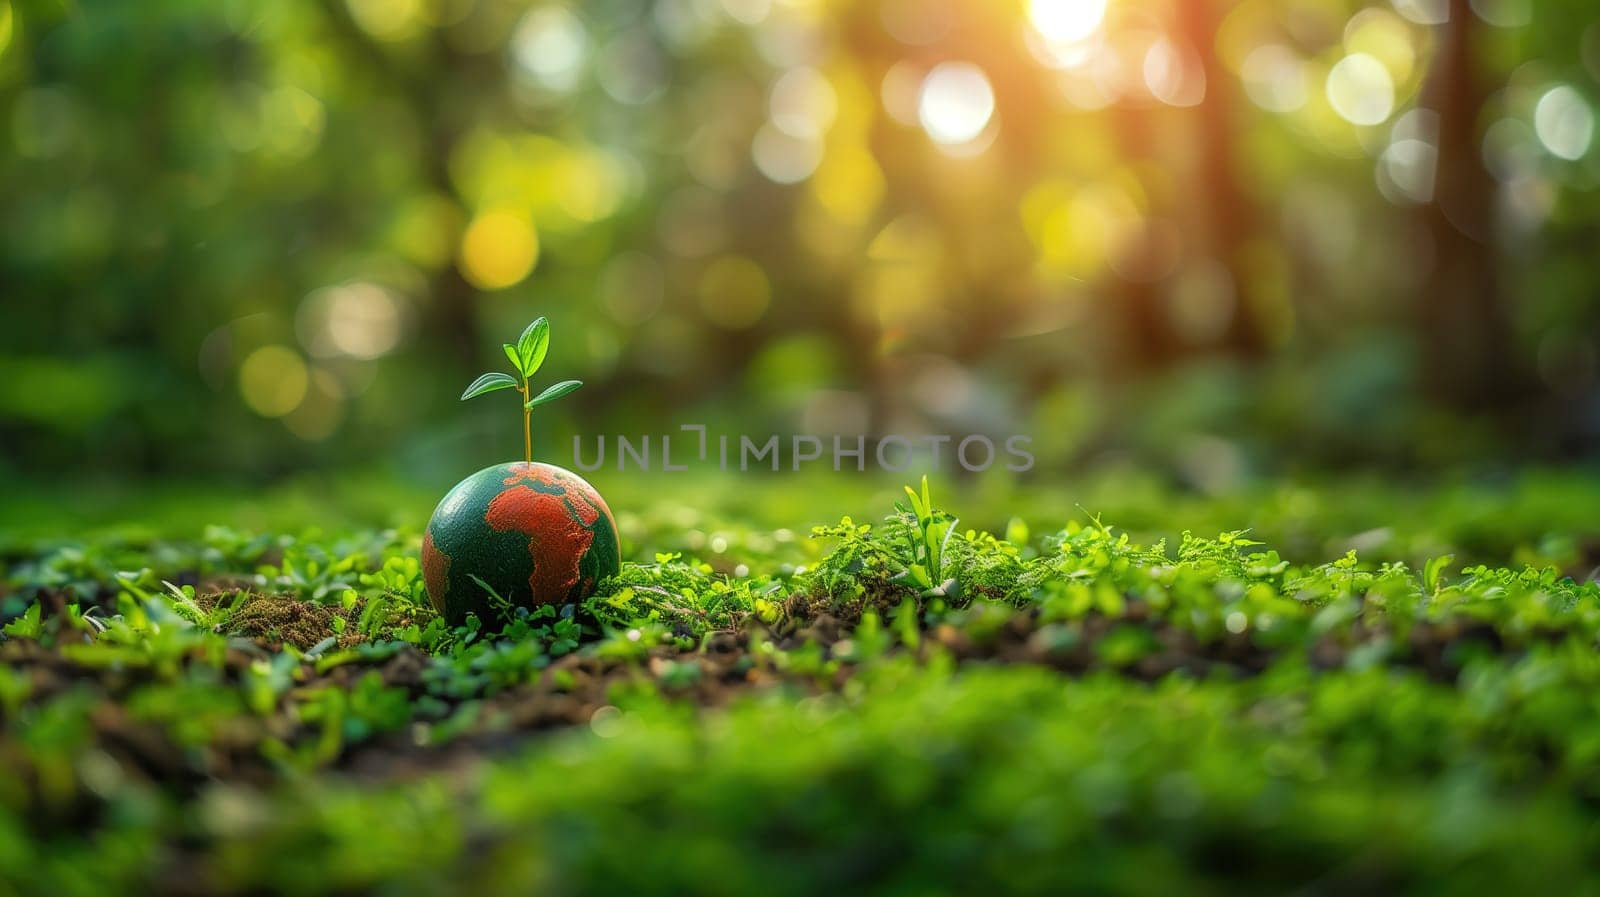 A small tree is seen growing out of a ball-shaped object nestled in the green grass. The young tree is beginning to take root, symbolizing growth and new life on Earth Day.